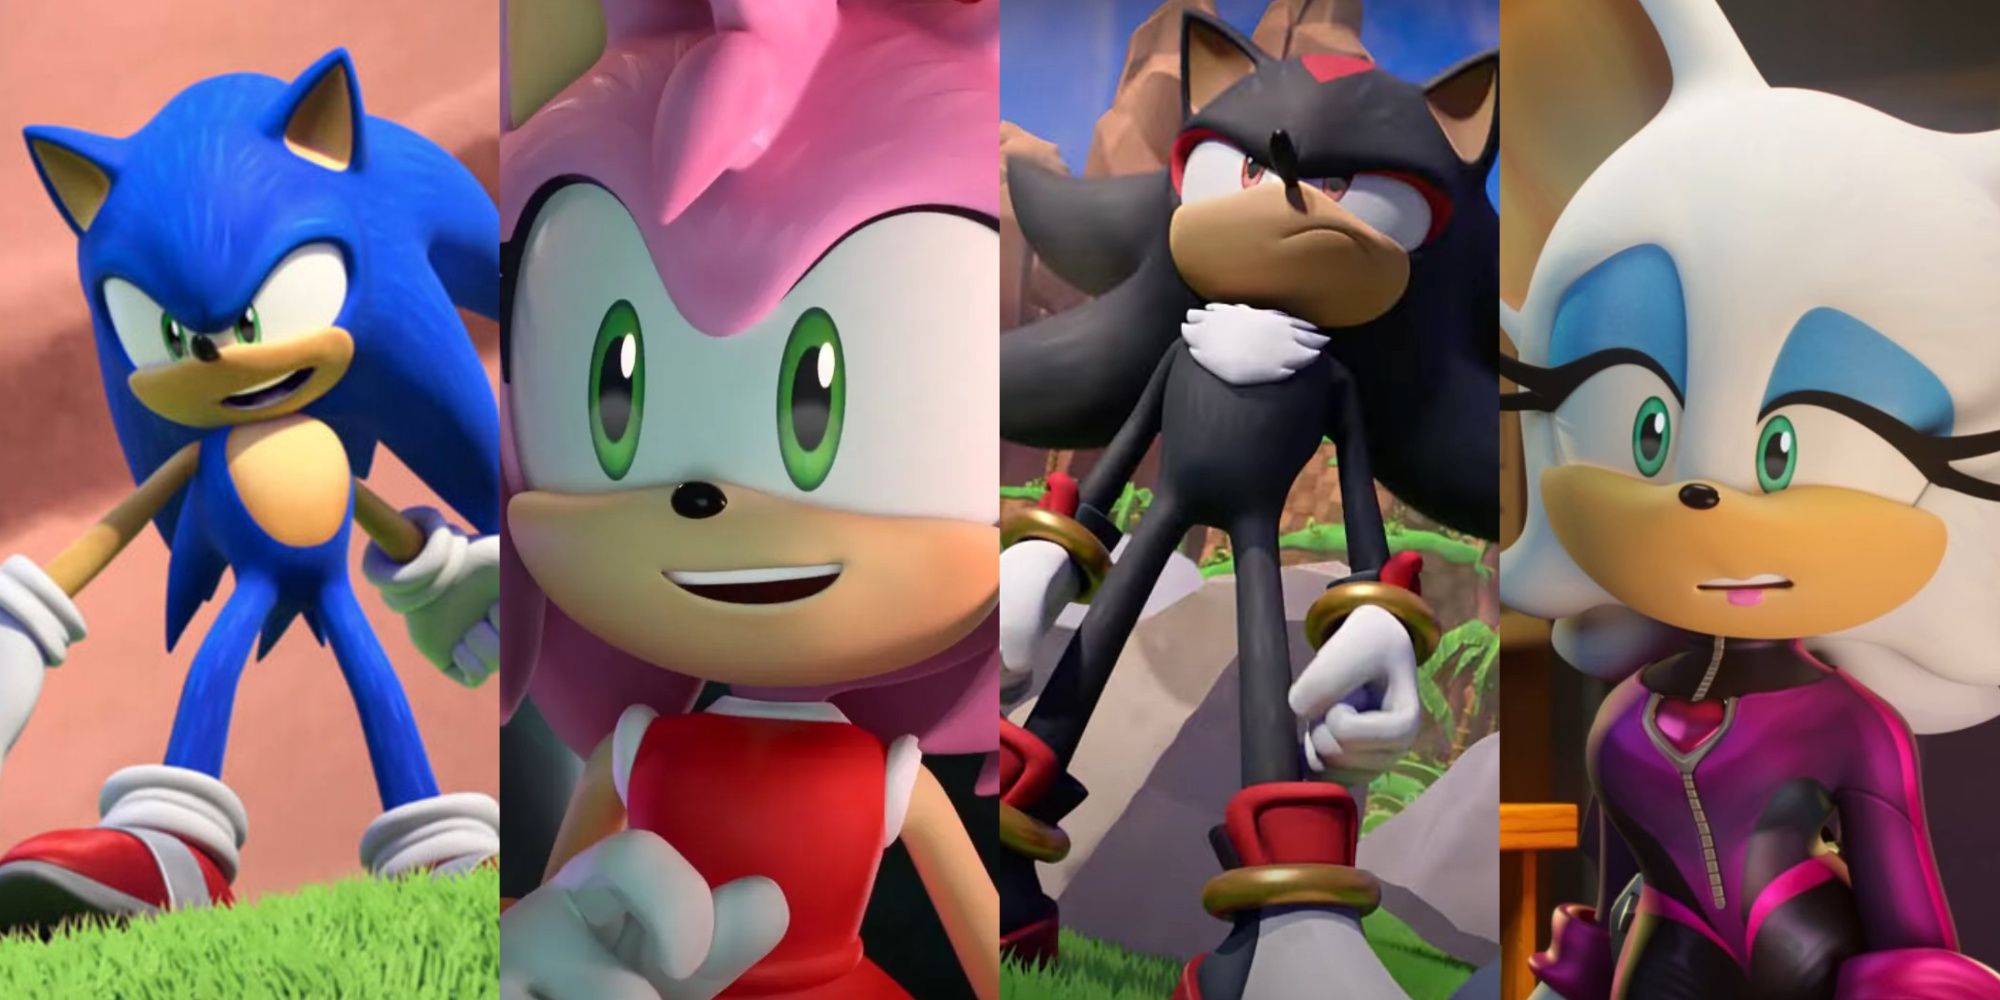 15 Best Sonic the Hedgehog Characters of All Time (Ranked)